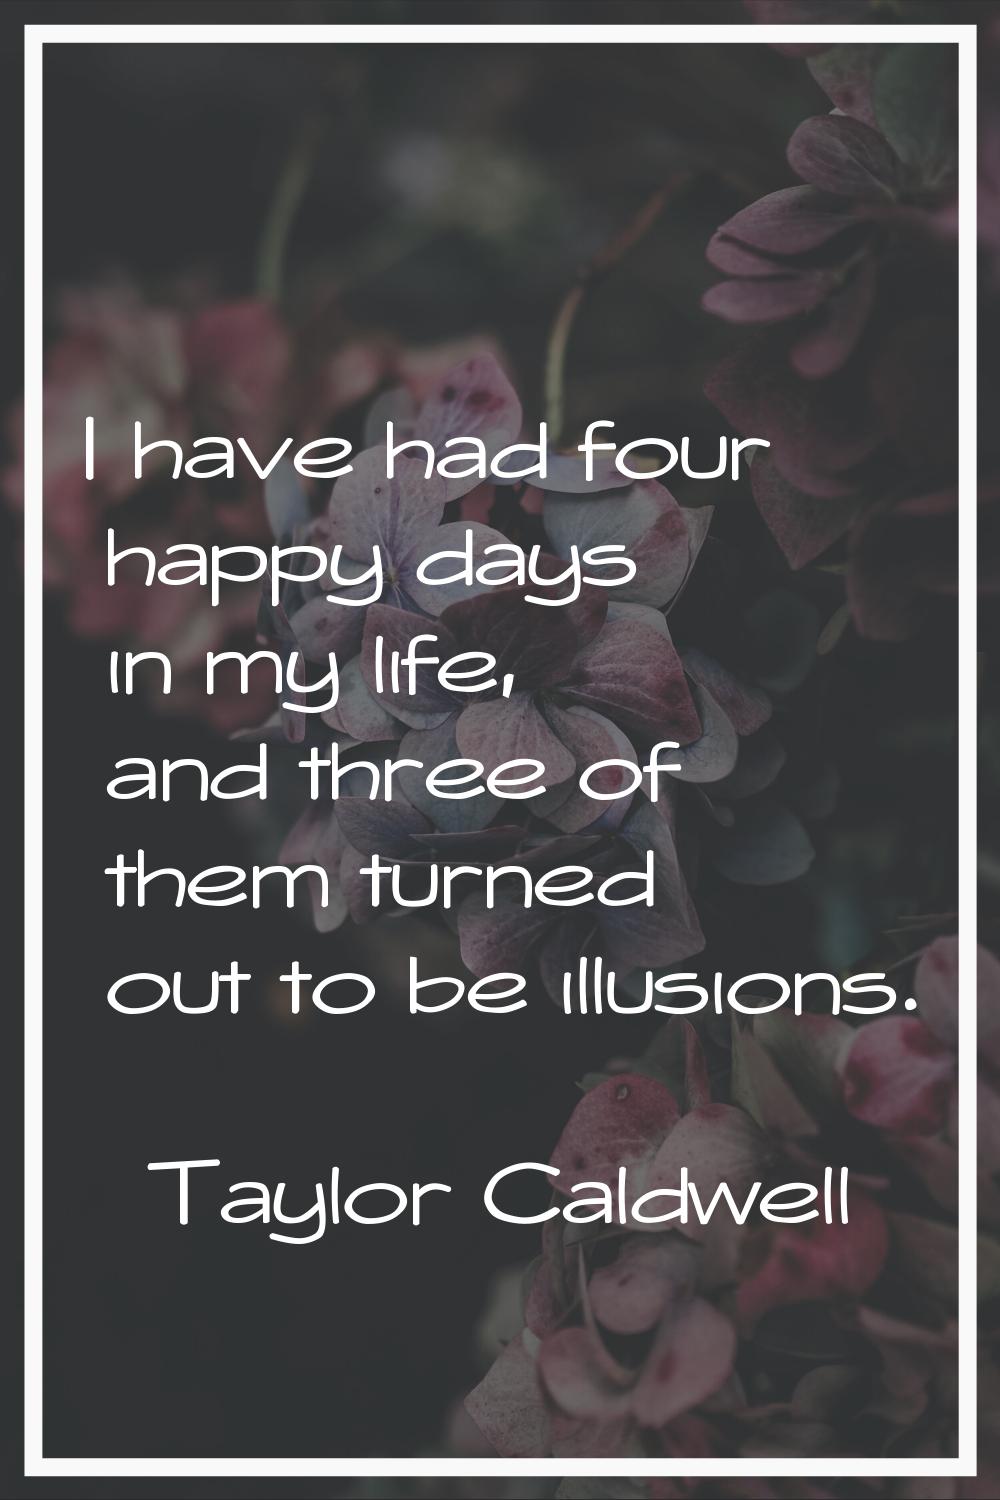 I have had four happy days in my life, and three of them turned out to be illusions.